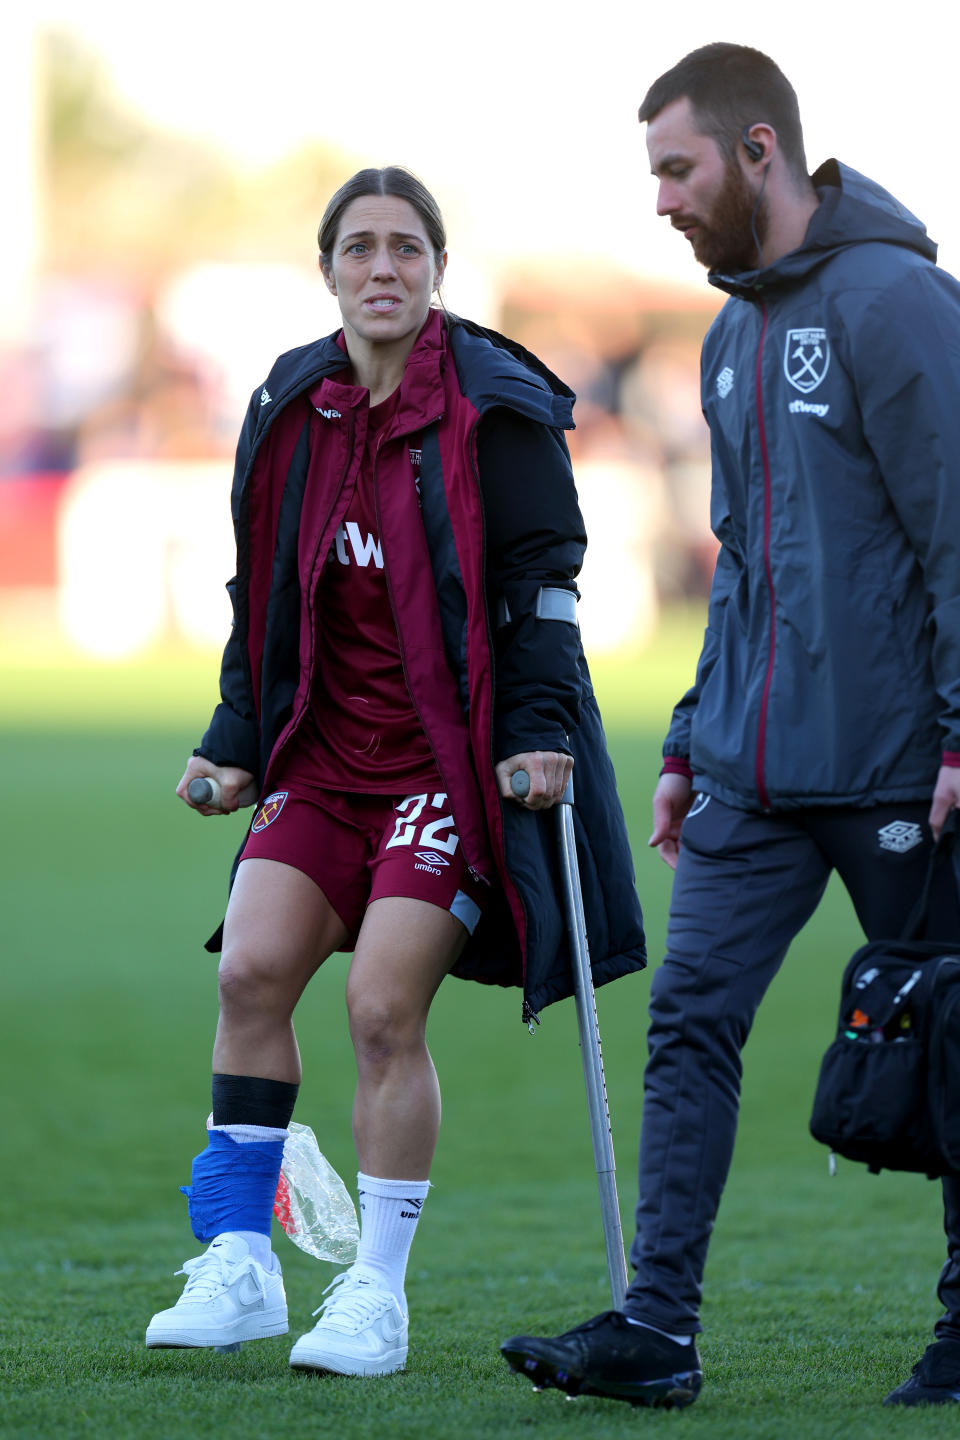 DAGENHAM, ENGLAND - MARCH 24: Katrina Gorry of West Ham United leaves the field at half-time on crutches during the Barclays Women's Super League match between West Ham United and Chelsea FC at Chigwell Construction Stadium on March 24, 2024 in Dagenham, England. (Photo by Andrew Redington/Getty Images)